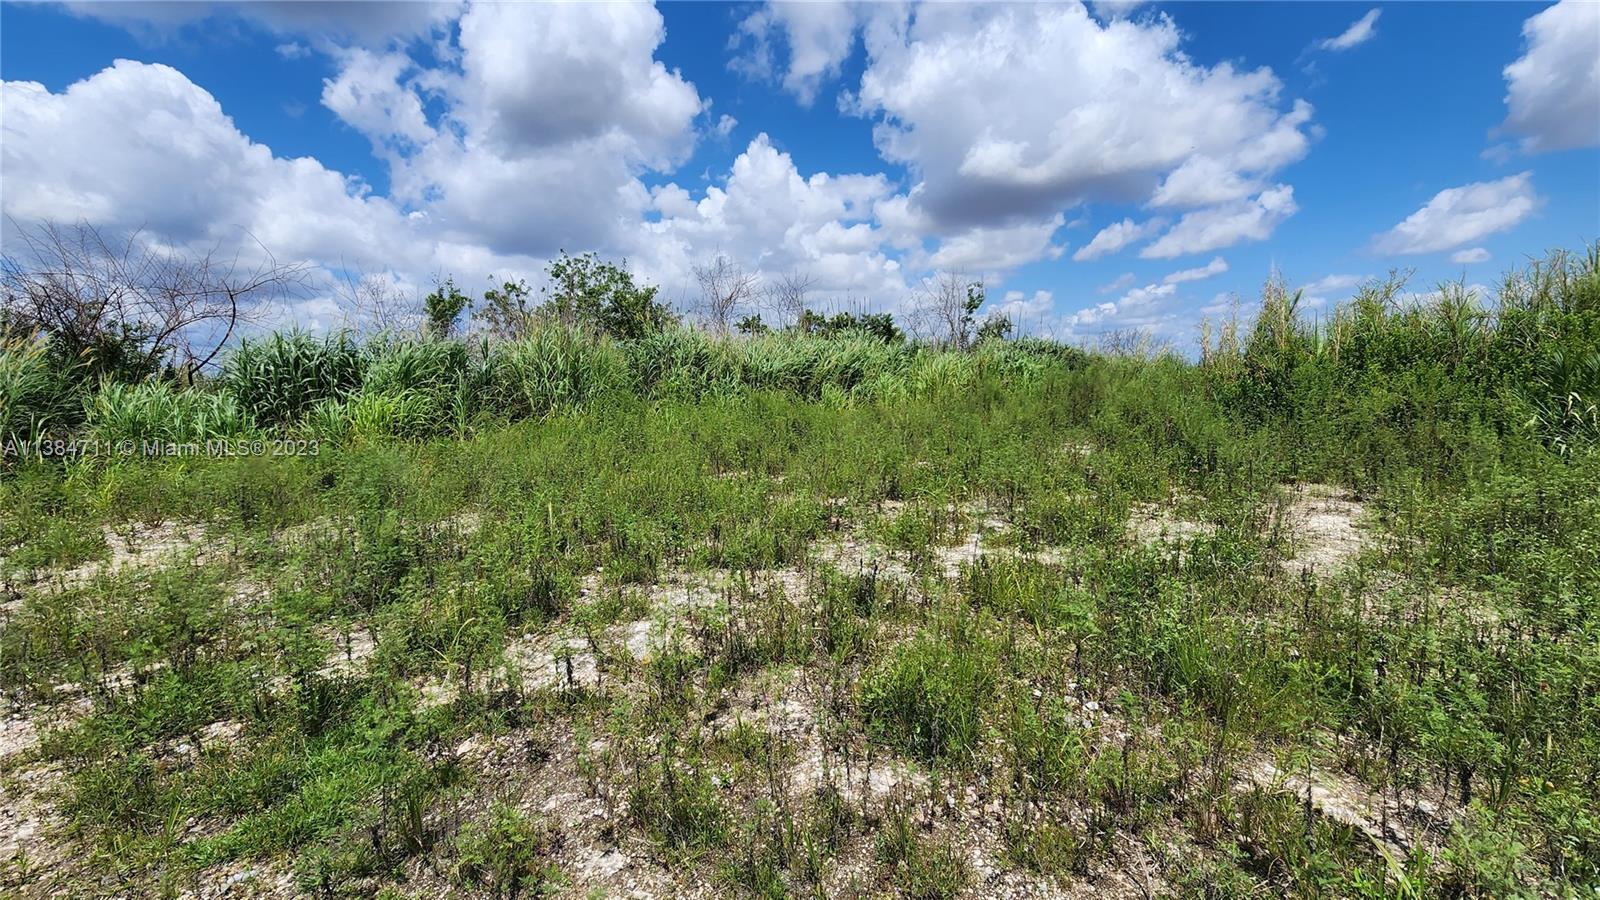 Photo of W223FT Of S32980FT in Unincorporated Dade County, FL